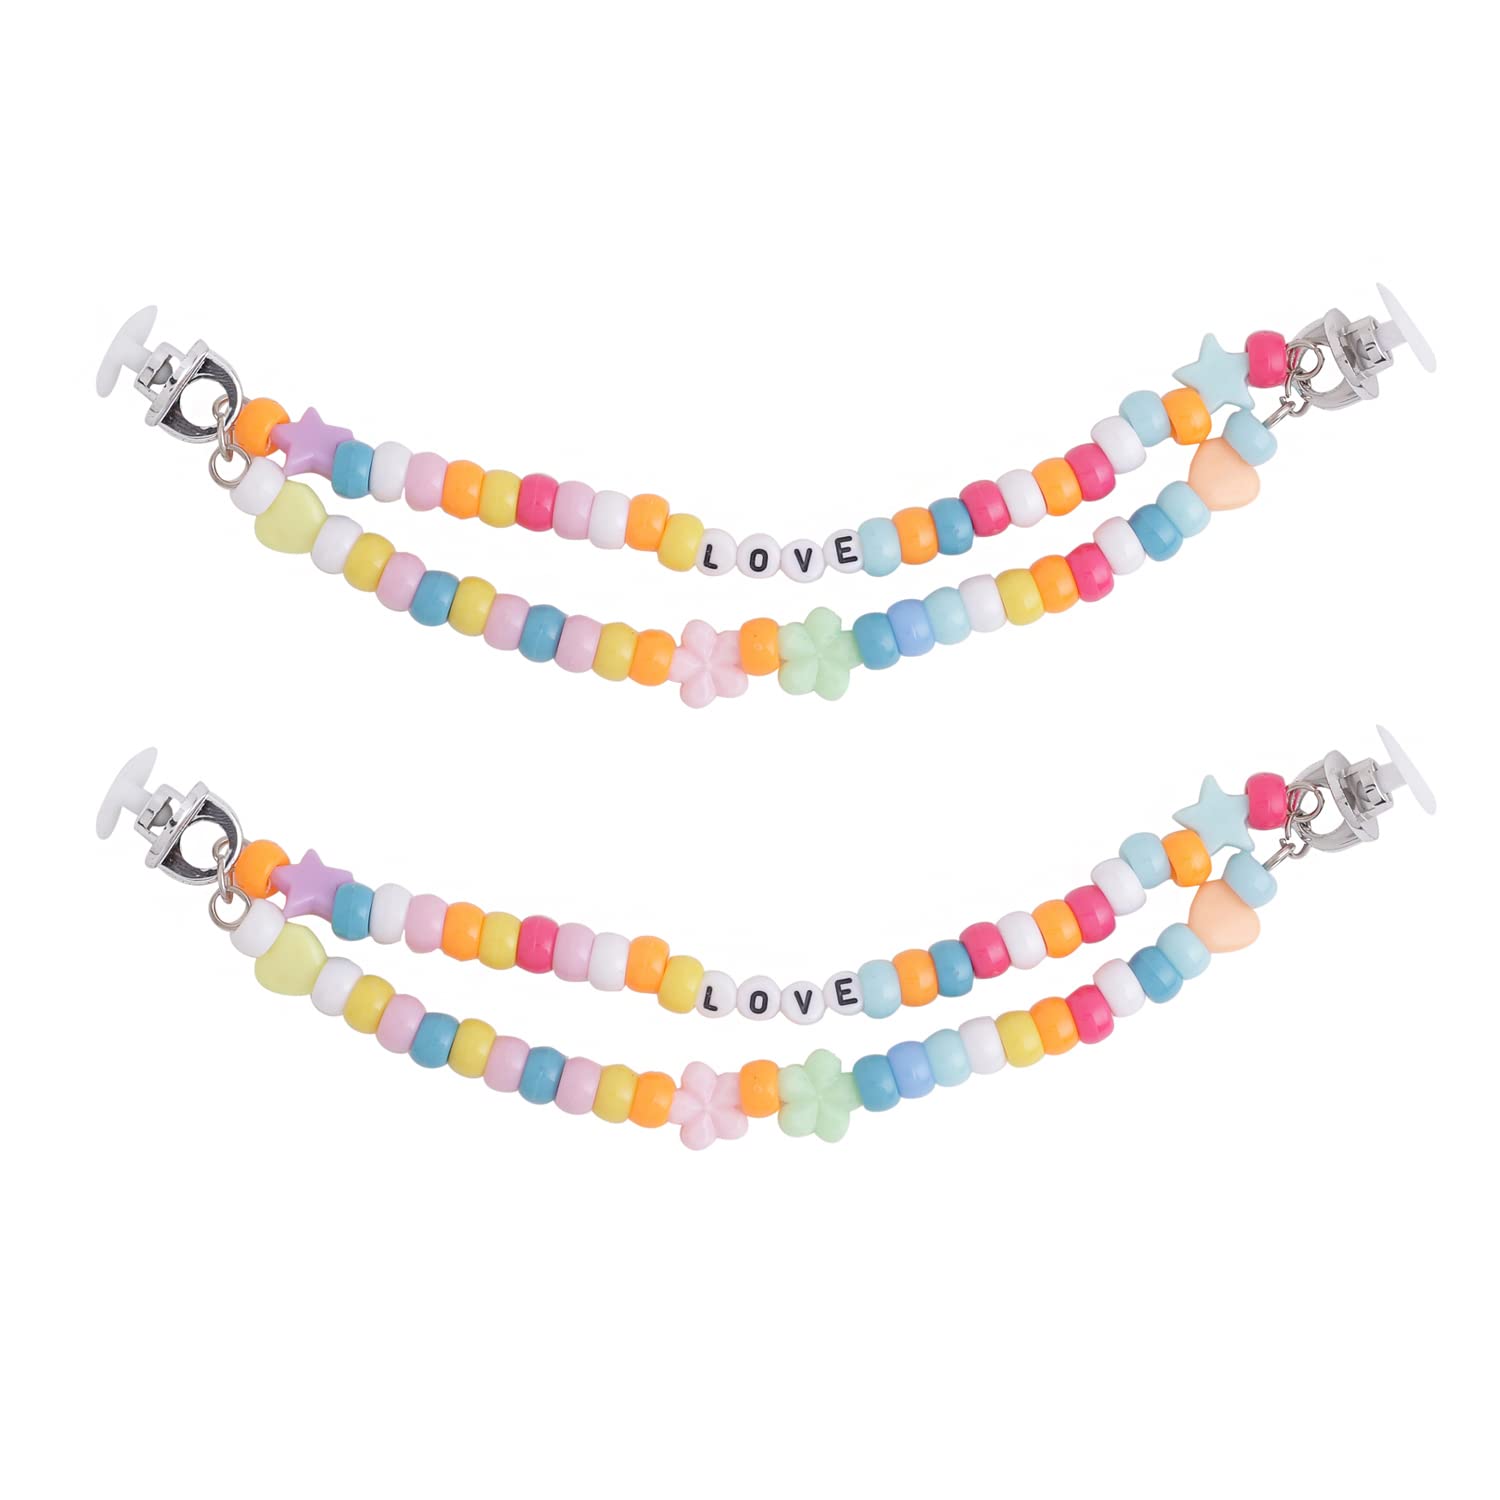 Melbees By Yellow Chime Shoe Chains for Kids Girls Teens | Shoe Accessories Beads Design | Shoe Decoration Charms| Shoe Chains for Unisex | Pack of 2 pieces | Shoe Chain Charms for Croc